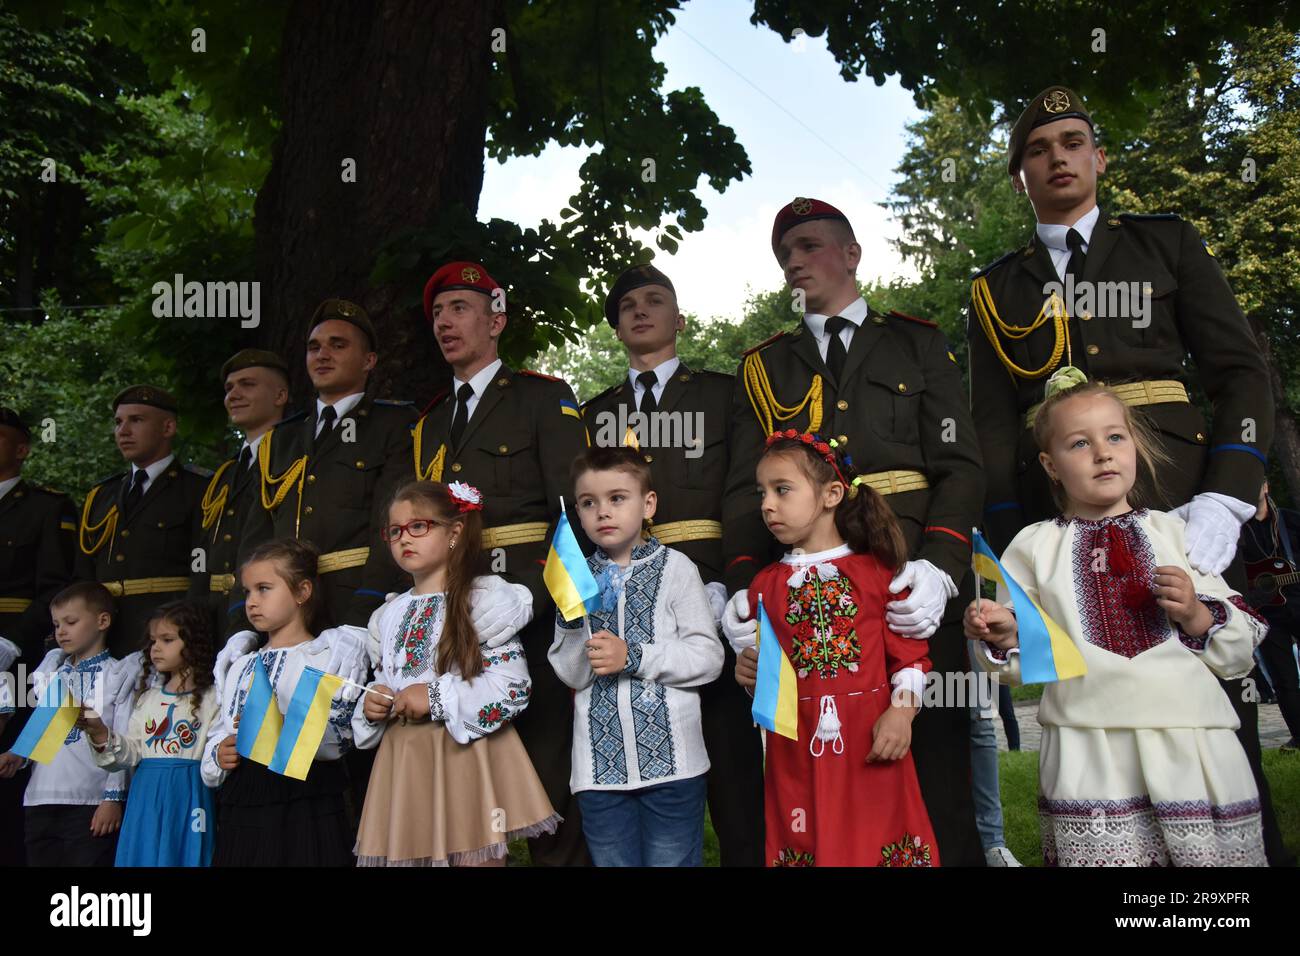 Cadets stand with children during the celebration of the Constitution Day of Ukraine. Ukraine celebrated the 27th anniversary of the adoption of the country's basic law - the constitution. In the conditions of the Russian-Ukrainian war, official events were very short. In Lviv, the Ukrainian flag was raised, honor guard marched, and a military band performed. (Photo by Pavlo Palamarchuk / SOPA mages/Sipa USA) Stock Photo